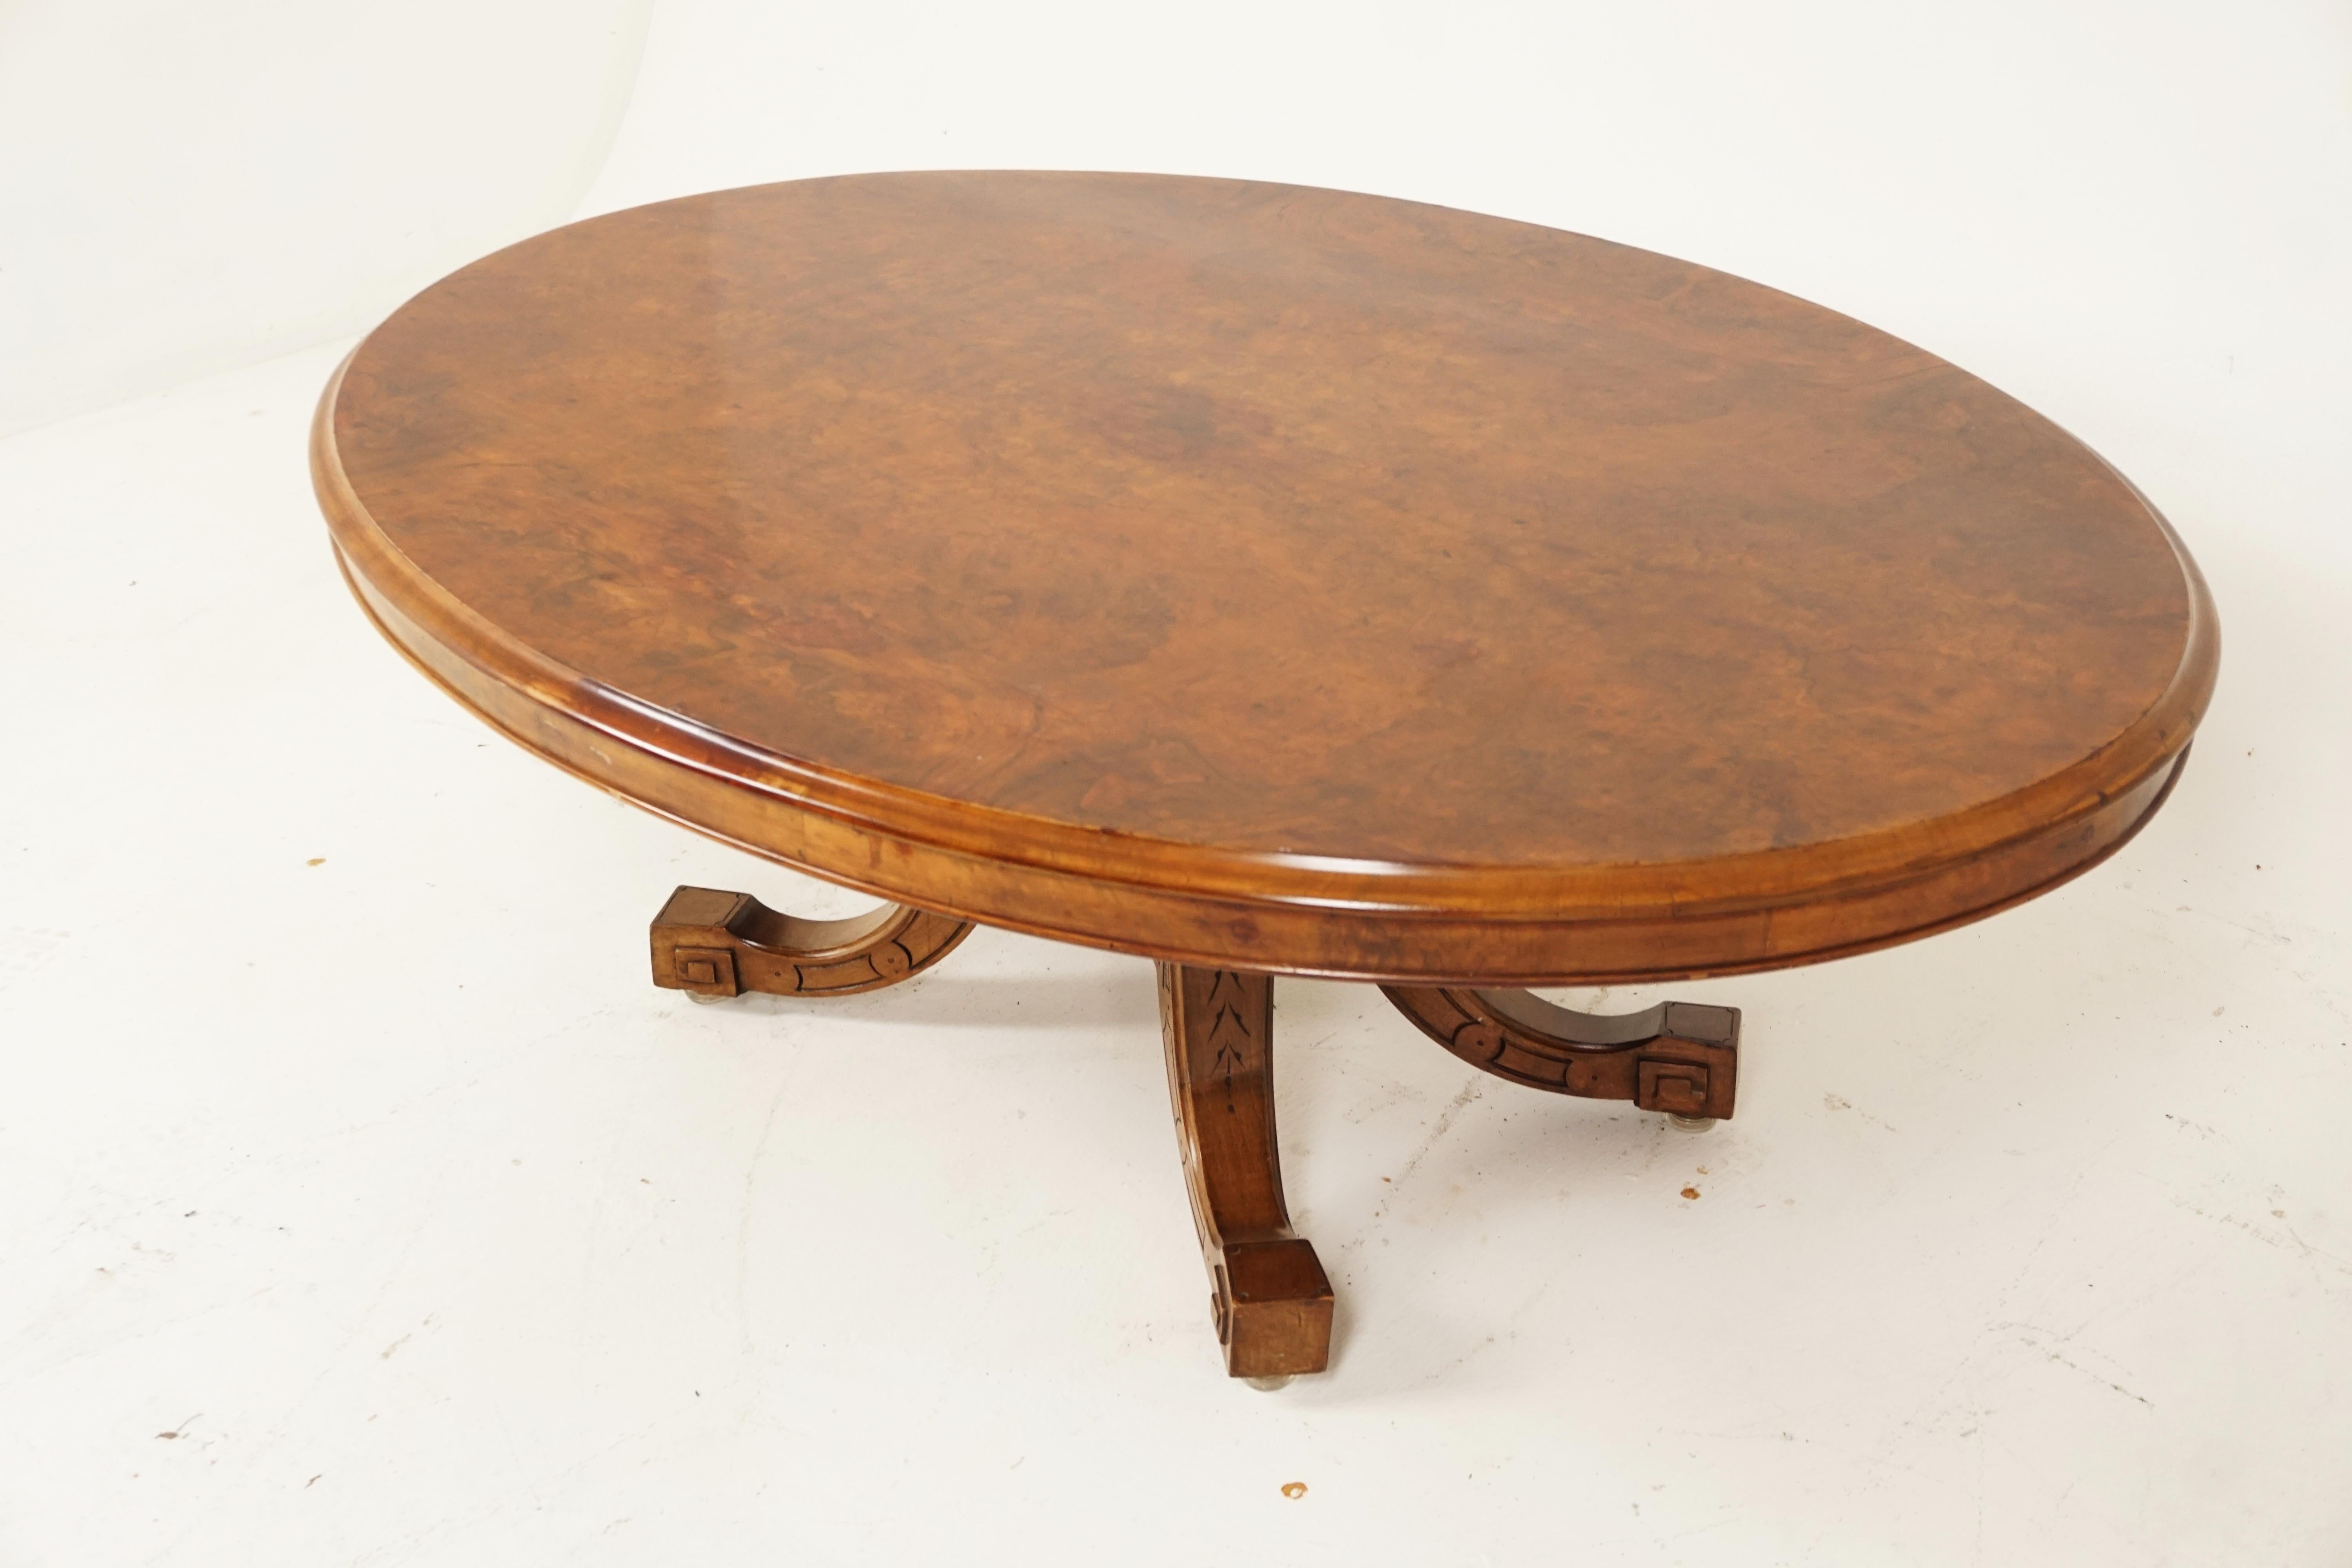 Antique Victorian Burr Walnut Oval Low coffee table reduced, Scotland 1870, B2848

Scotland 1870
Solid walnut and veneer
Original finish
Oval top with moulded edge
The table stands on a quadruple base with four carved cabriole legs
Some minor